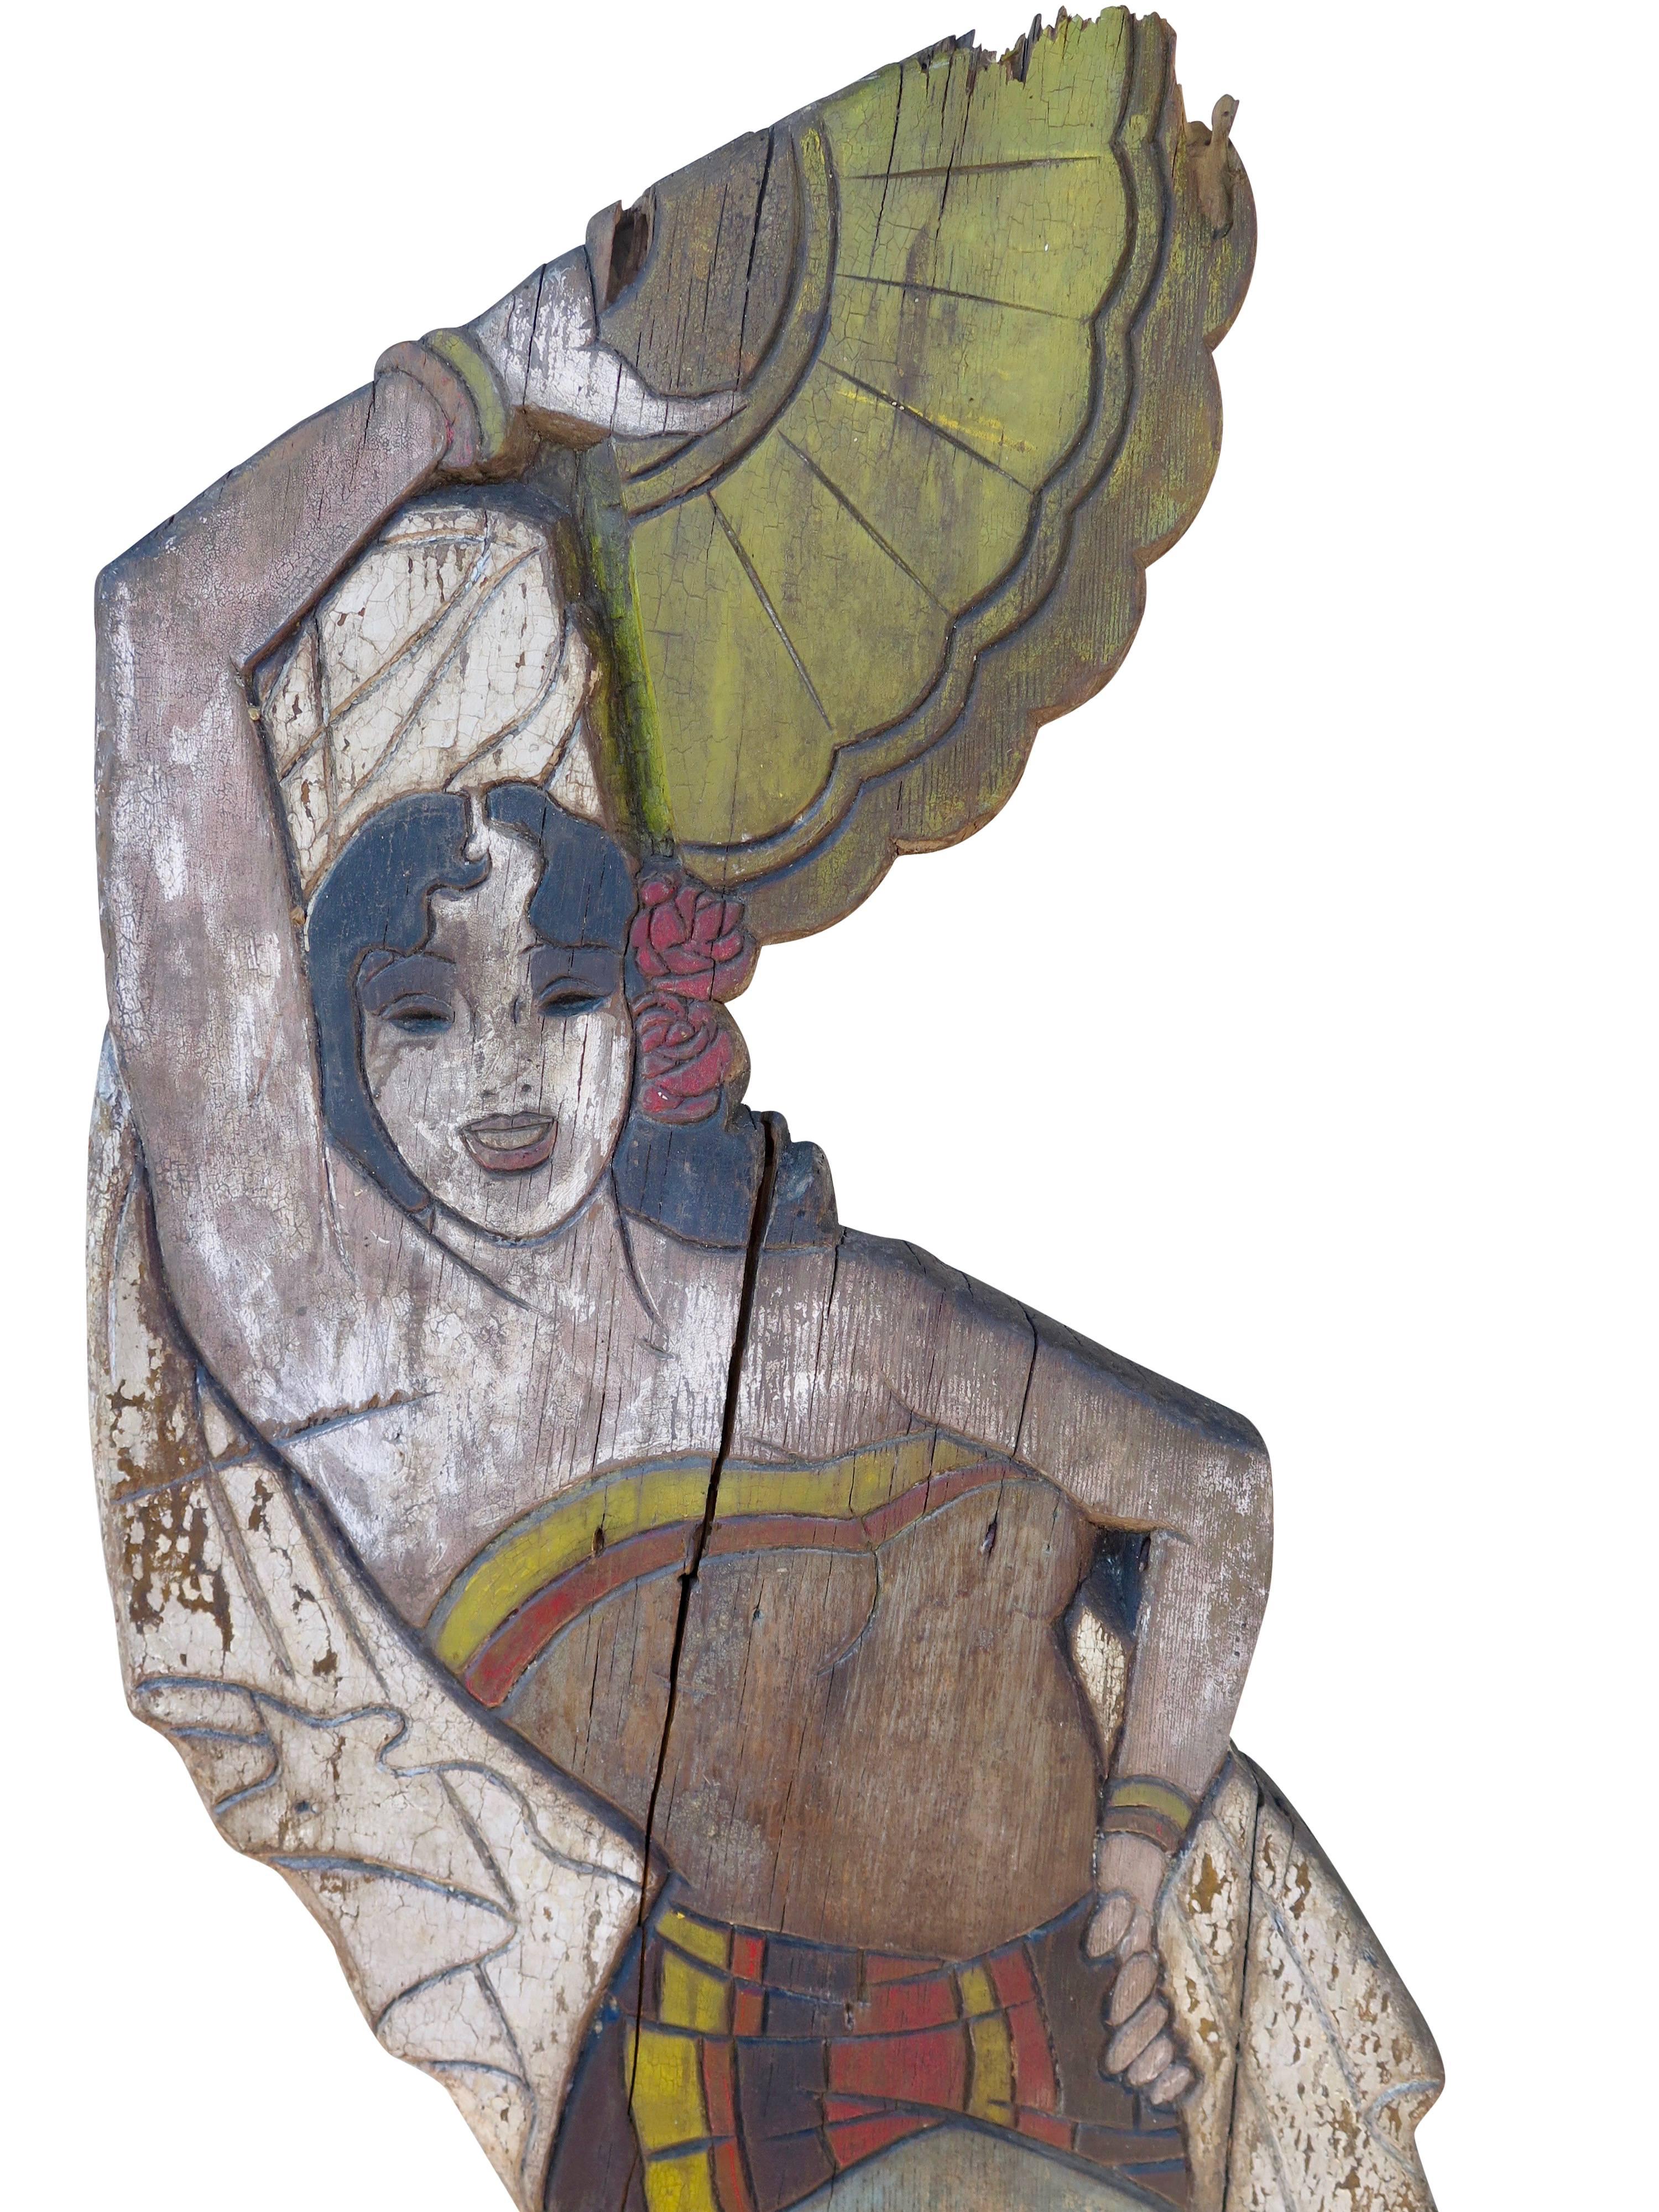 Likely from the 1930s, this life-size sign features a painted Spanish dancer on wood.